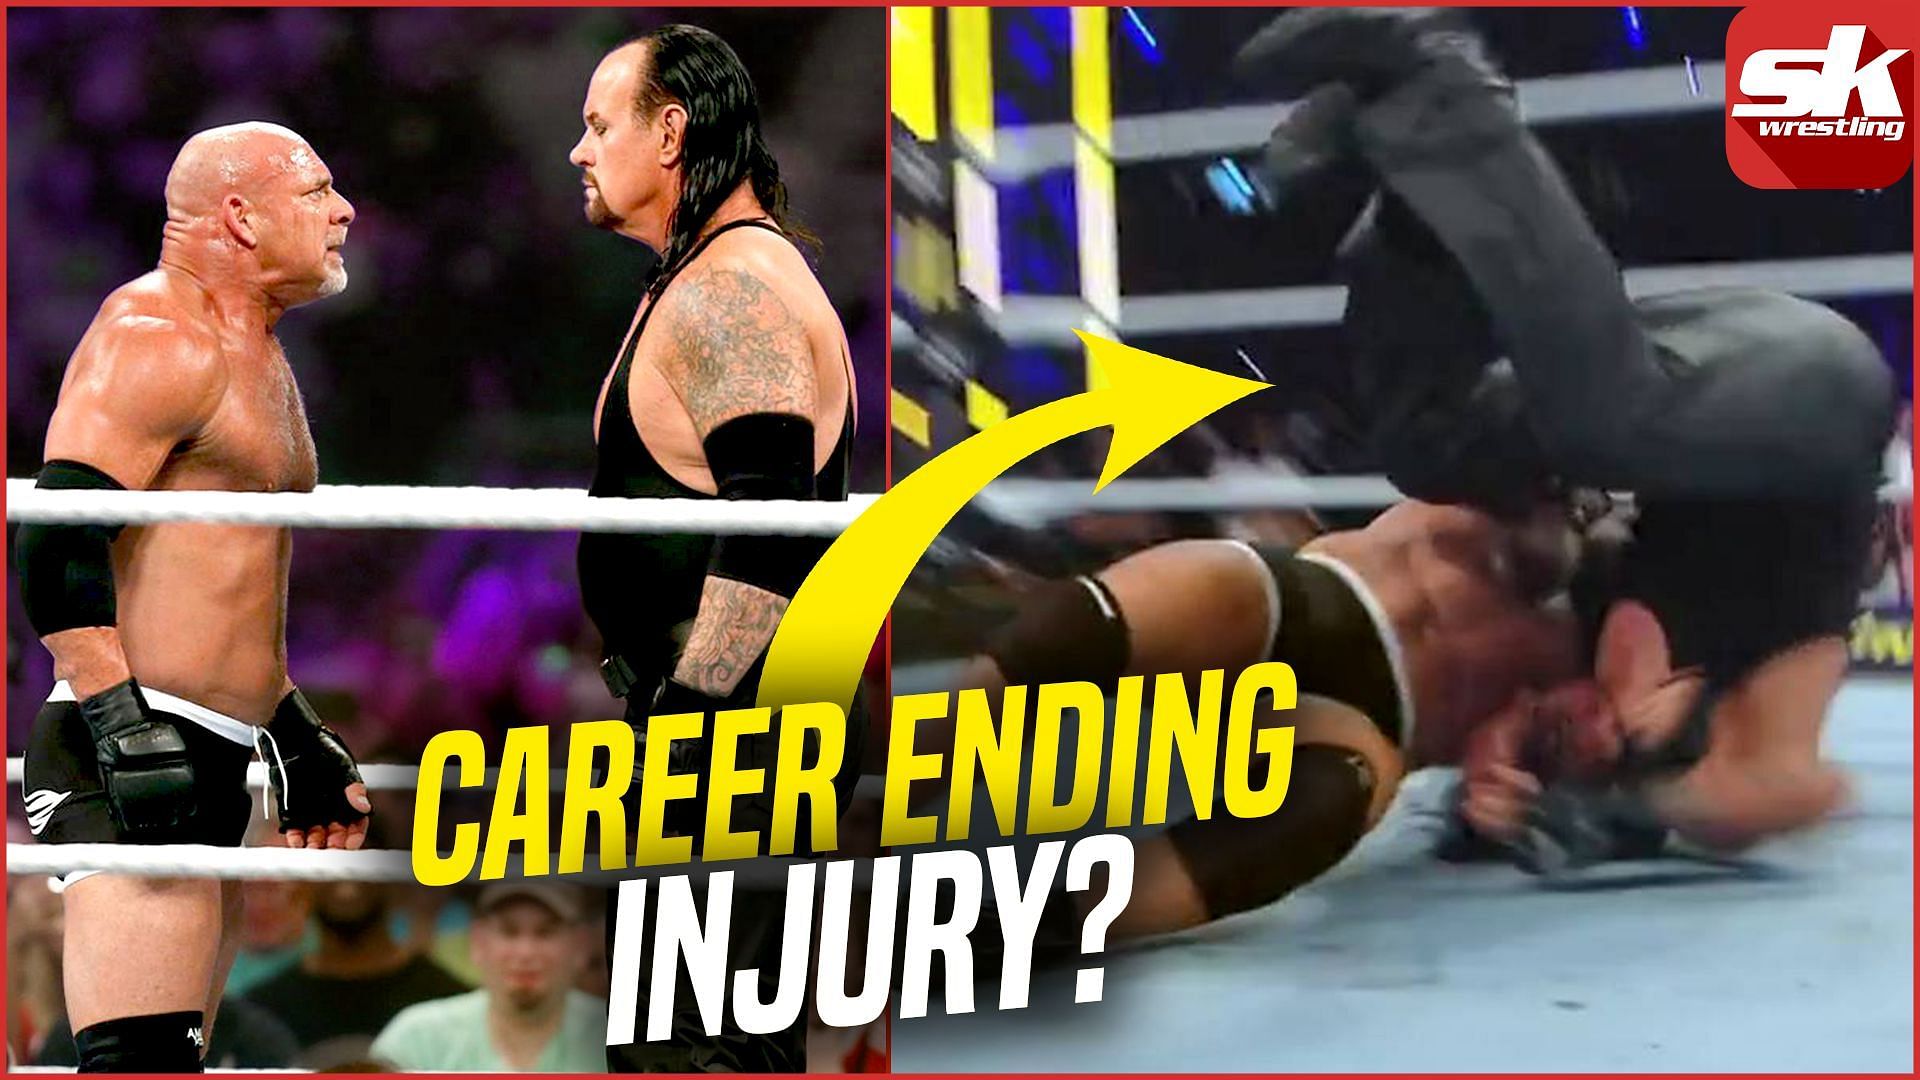 Injuries are never far away from WWE Superstars